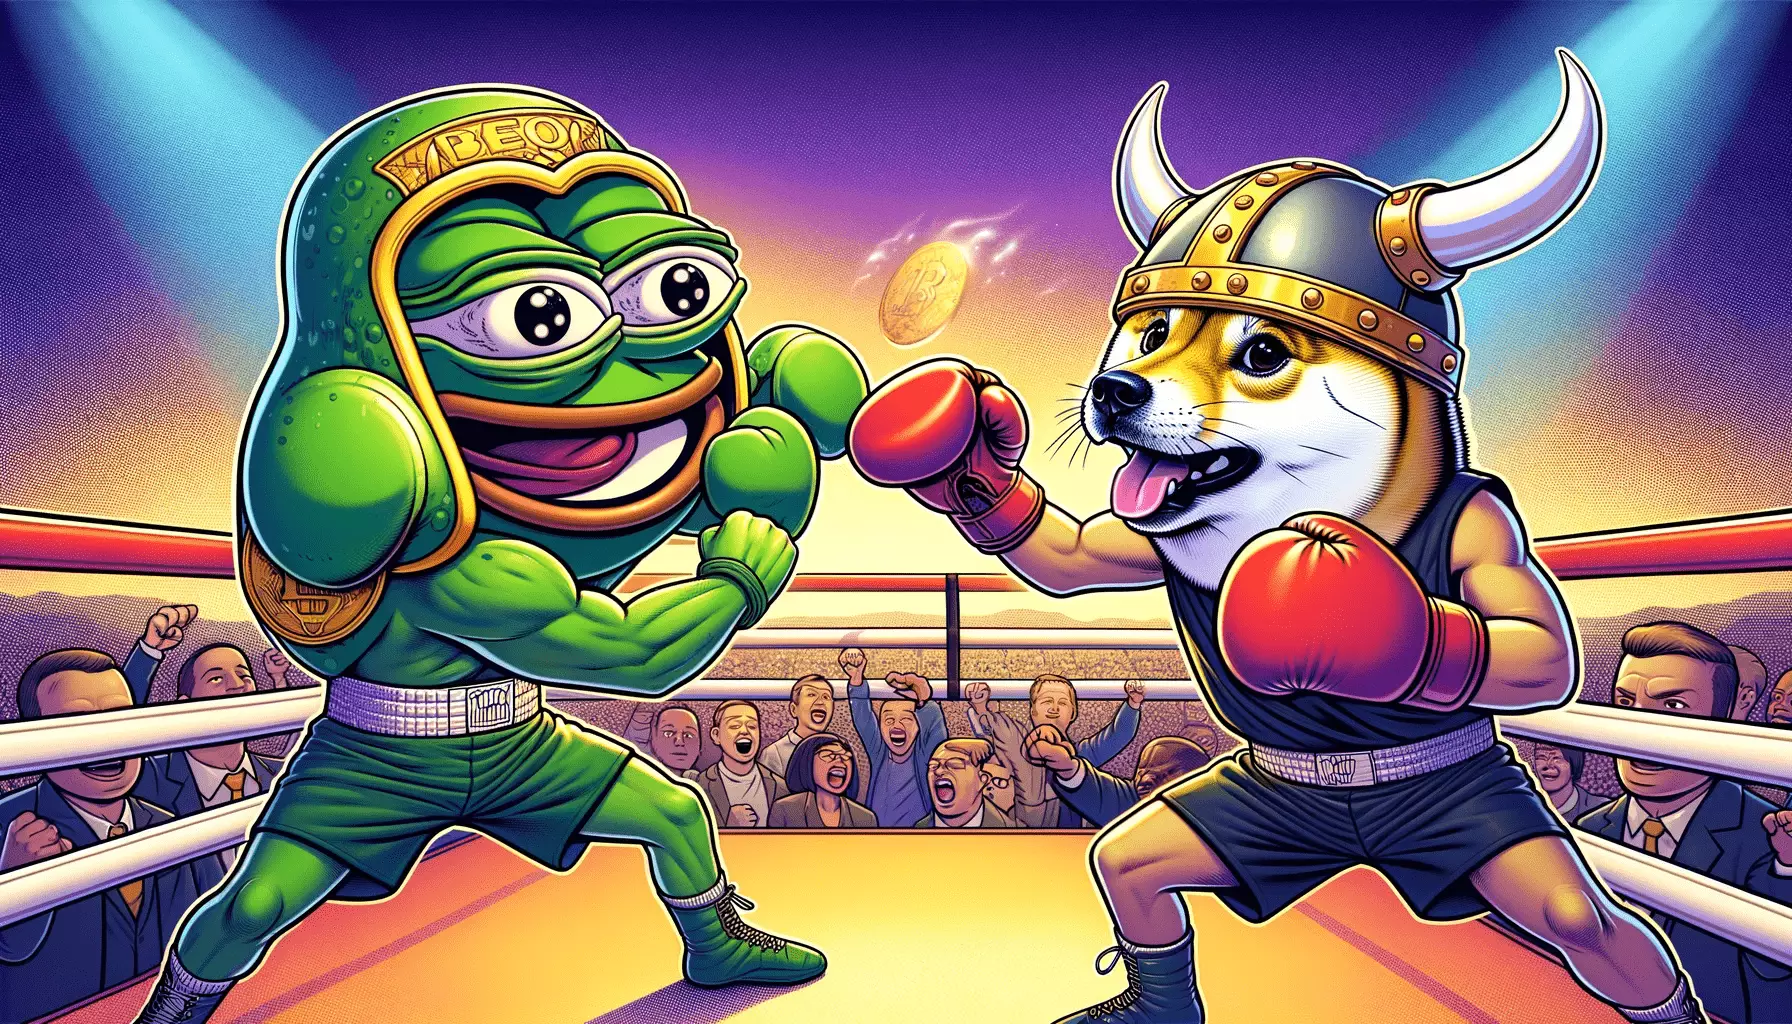 The Rising Significance of Bitcoin SV and the Emergence of Meme Kombat: An Analysis